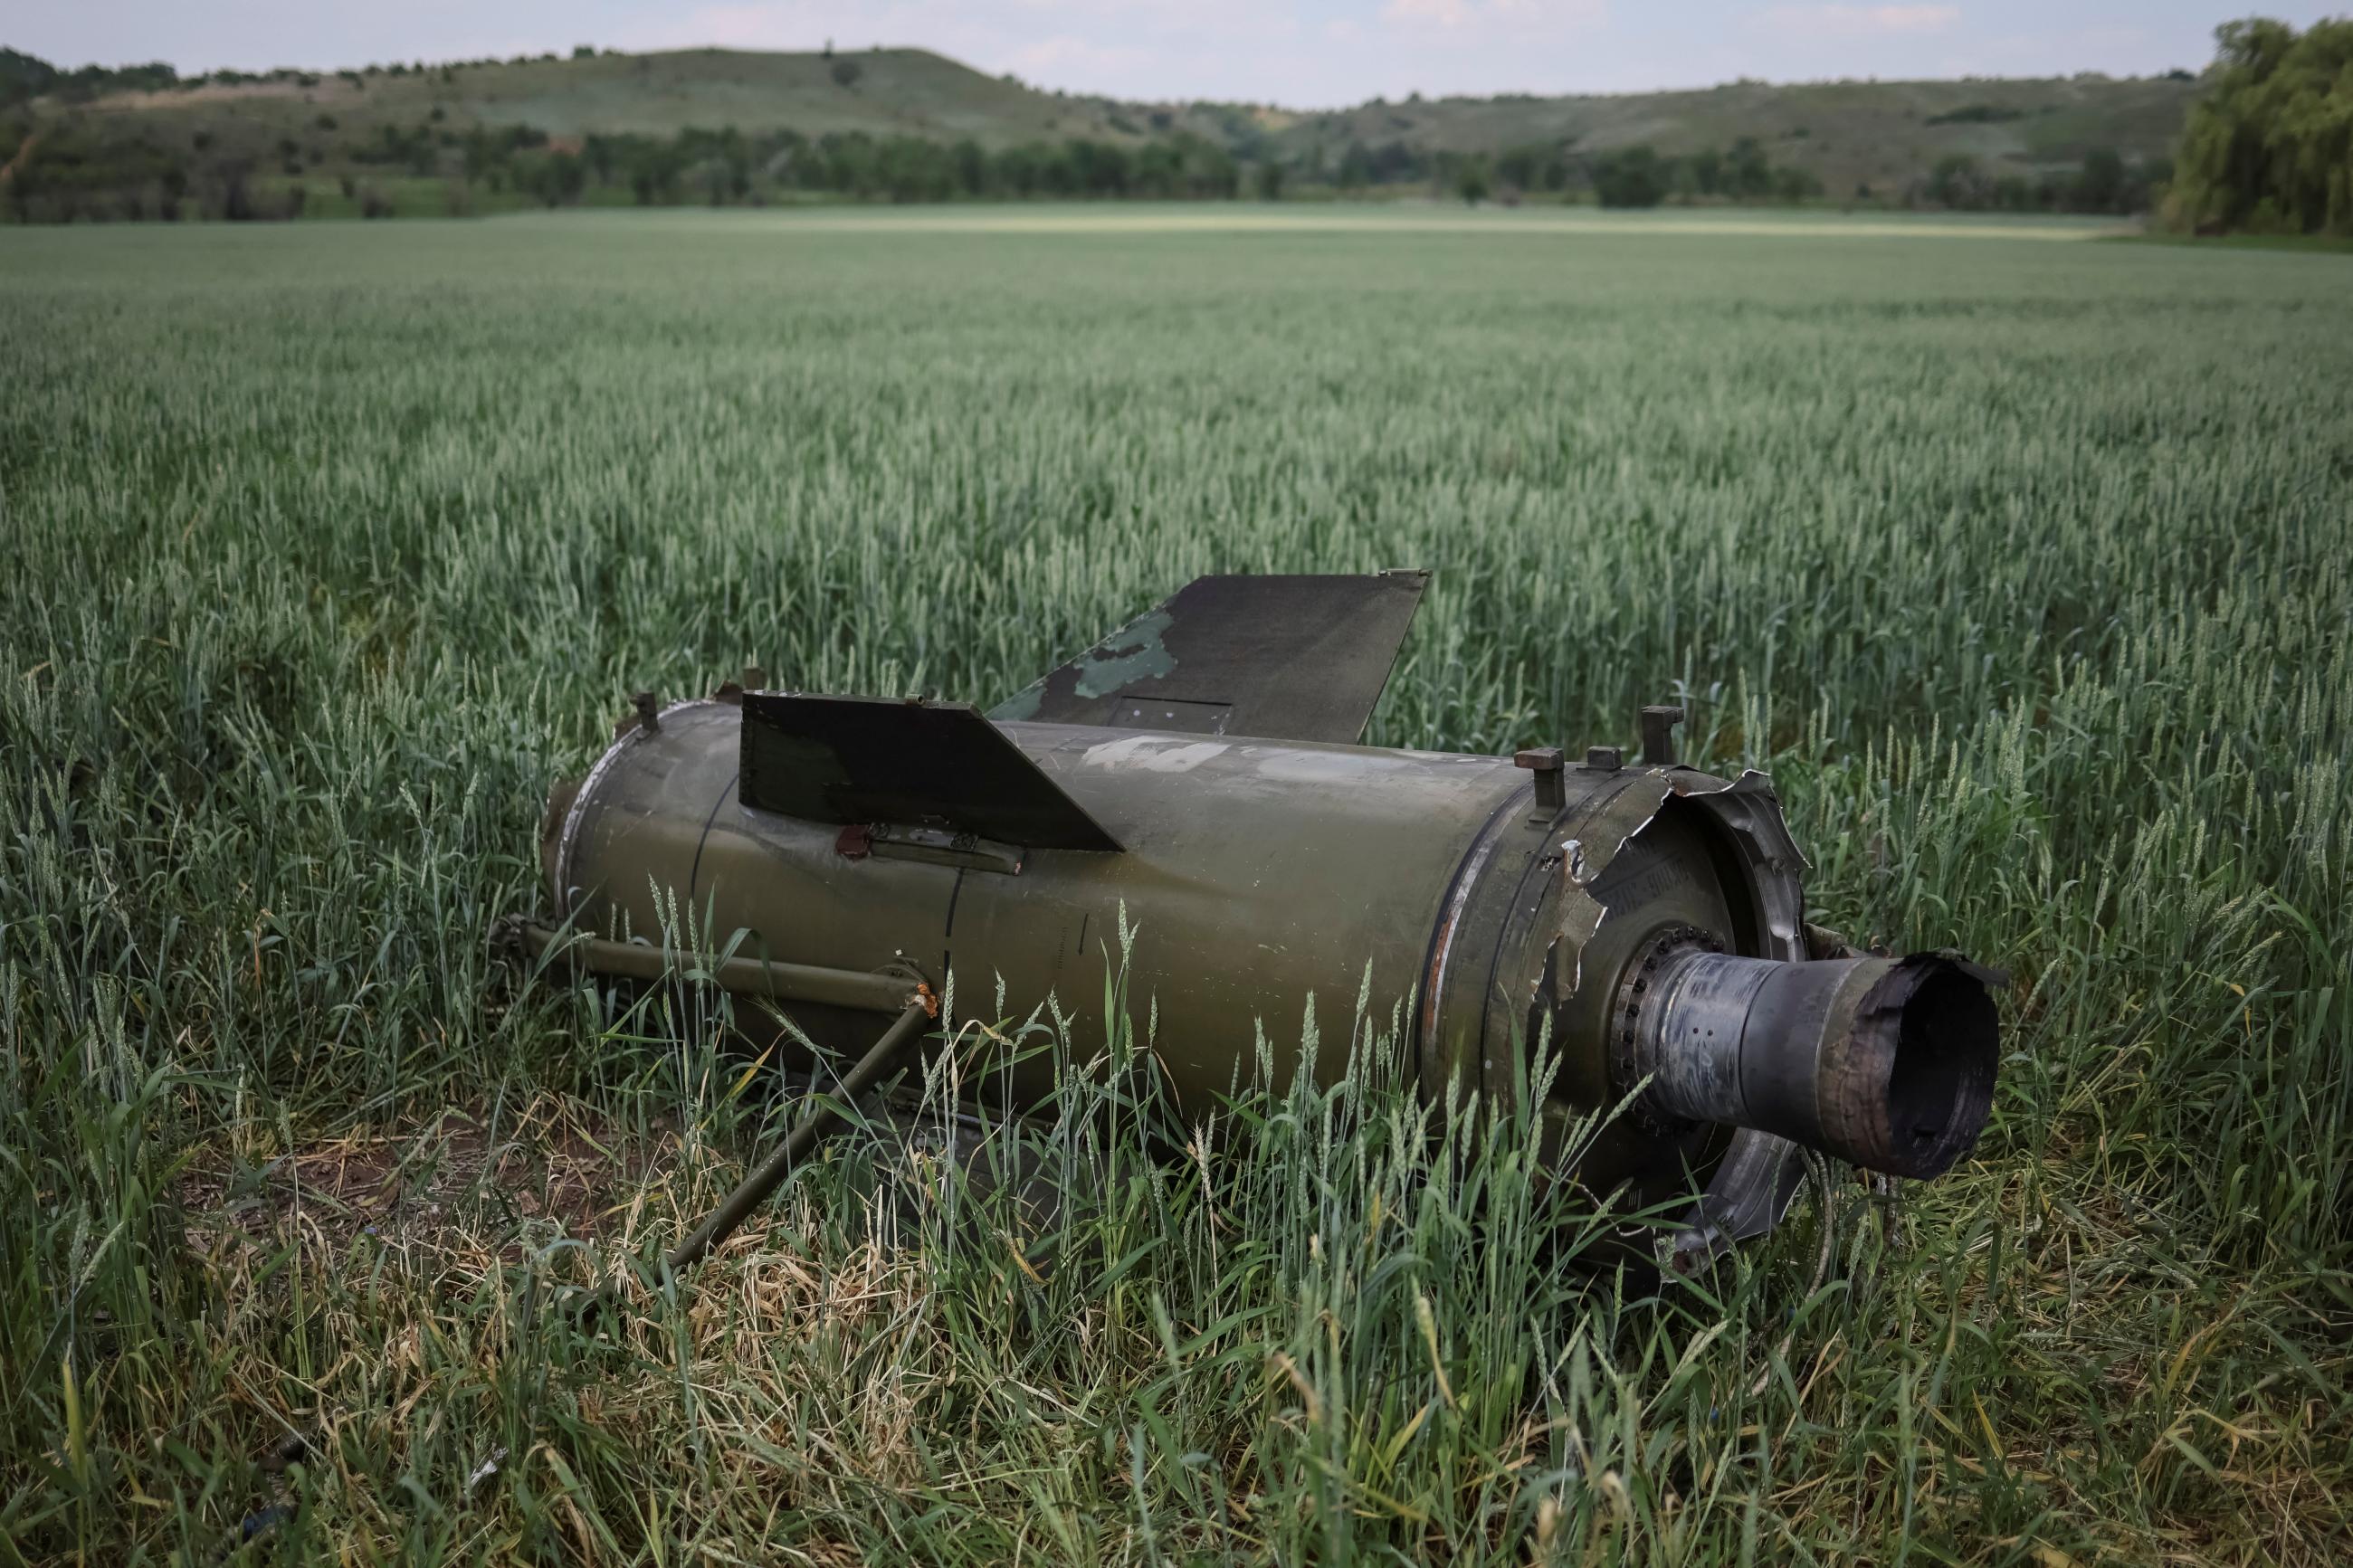 A large blackish-gray Russian Tochka-U ballistic missile sits in a field of wheat, during Russia's war on Ukraine, near the town of Soledar, in the Donetsk region Ukraine, on June 8, 2022. 